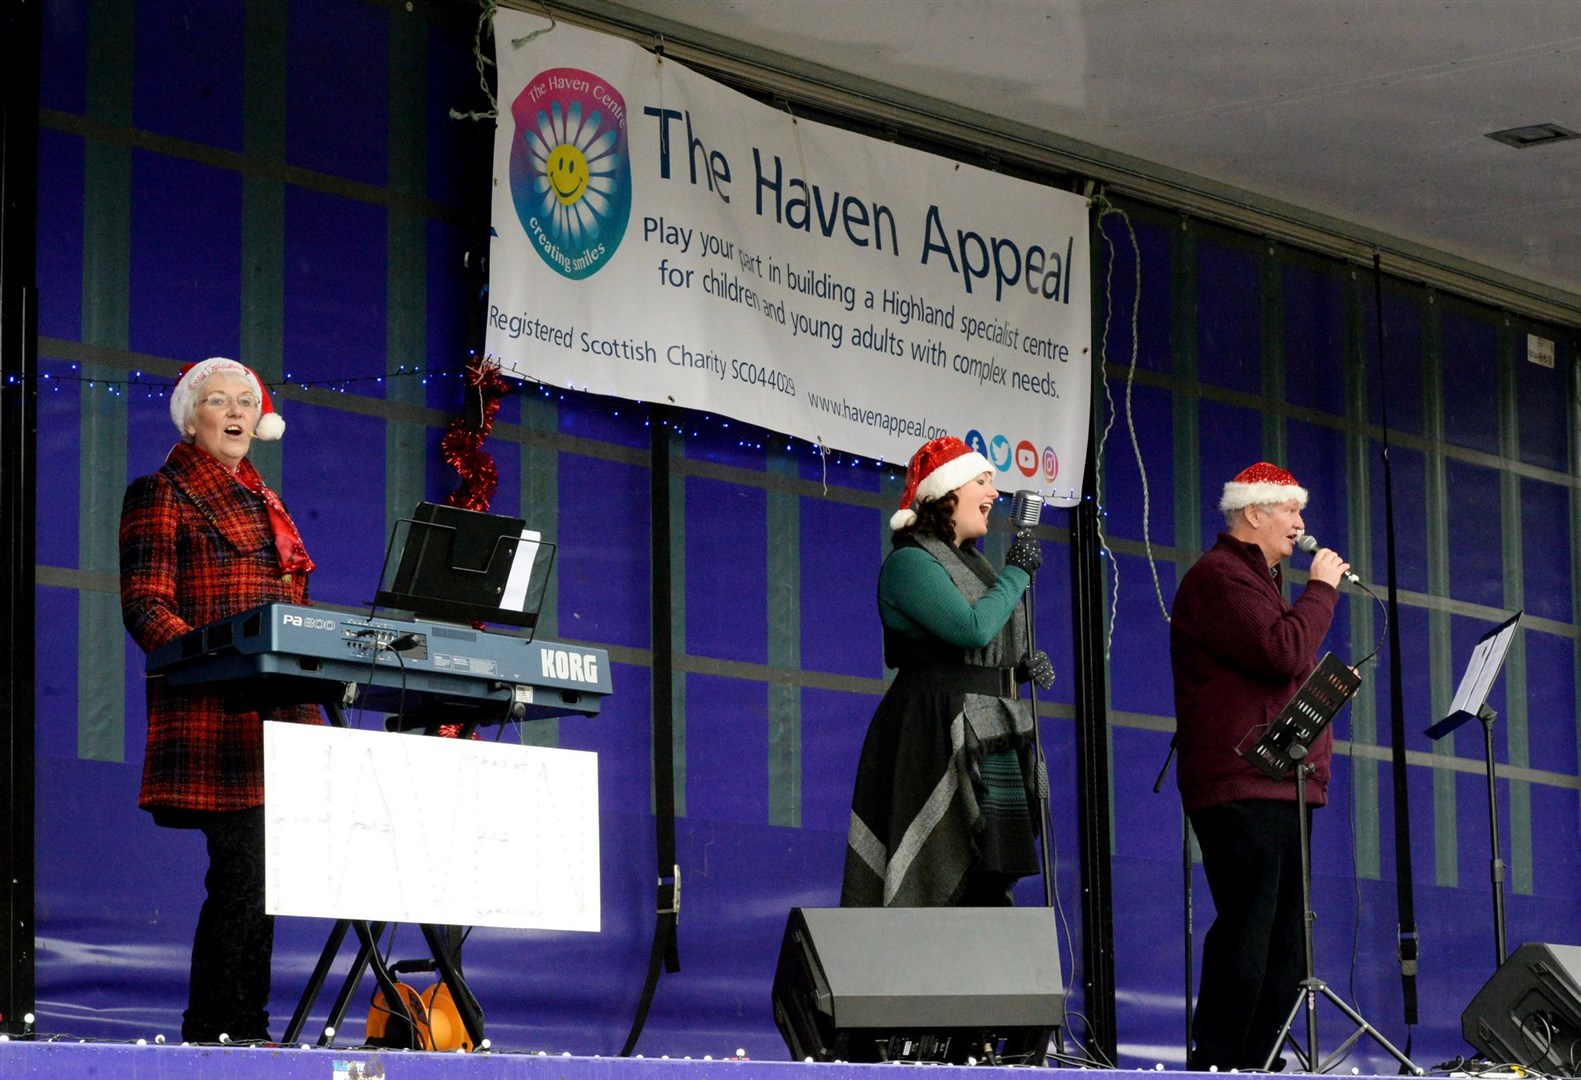 Getting into the Christmas spirit for the Haven Appeal.